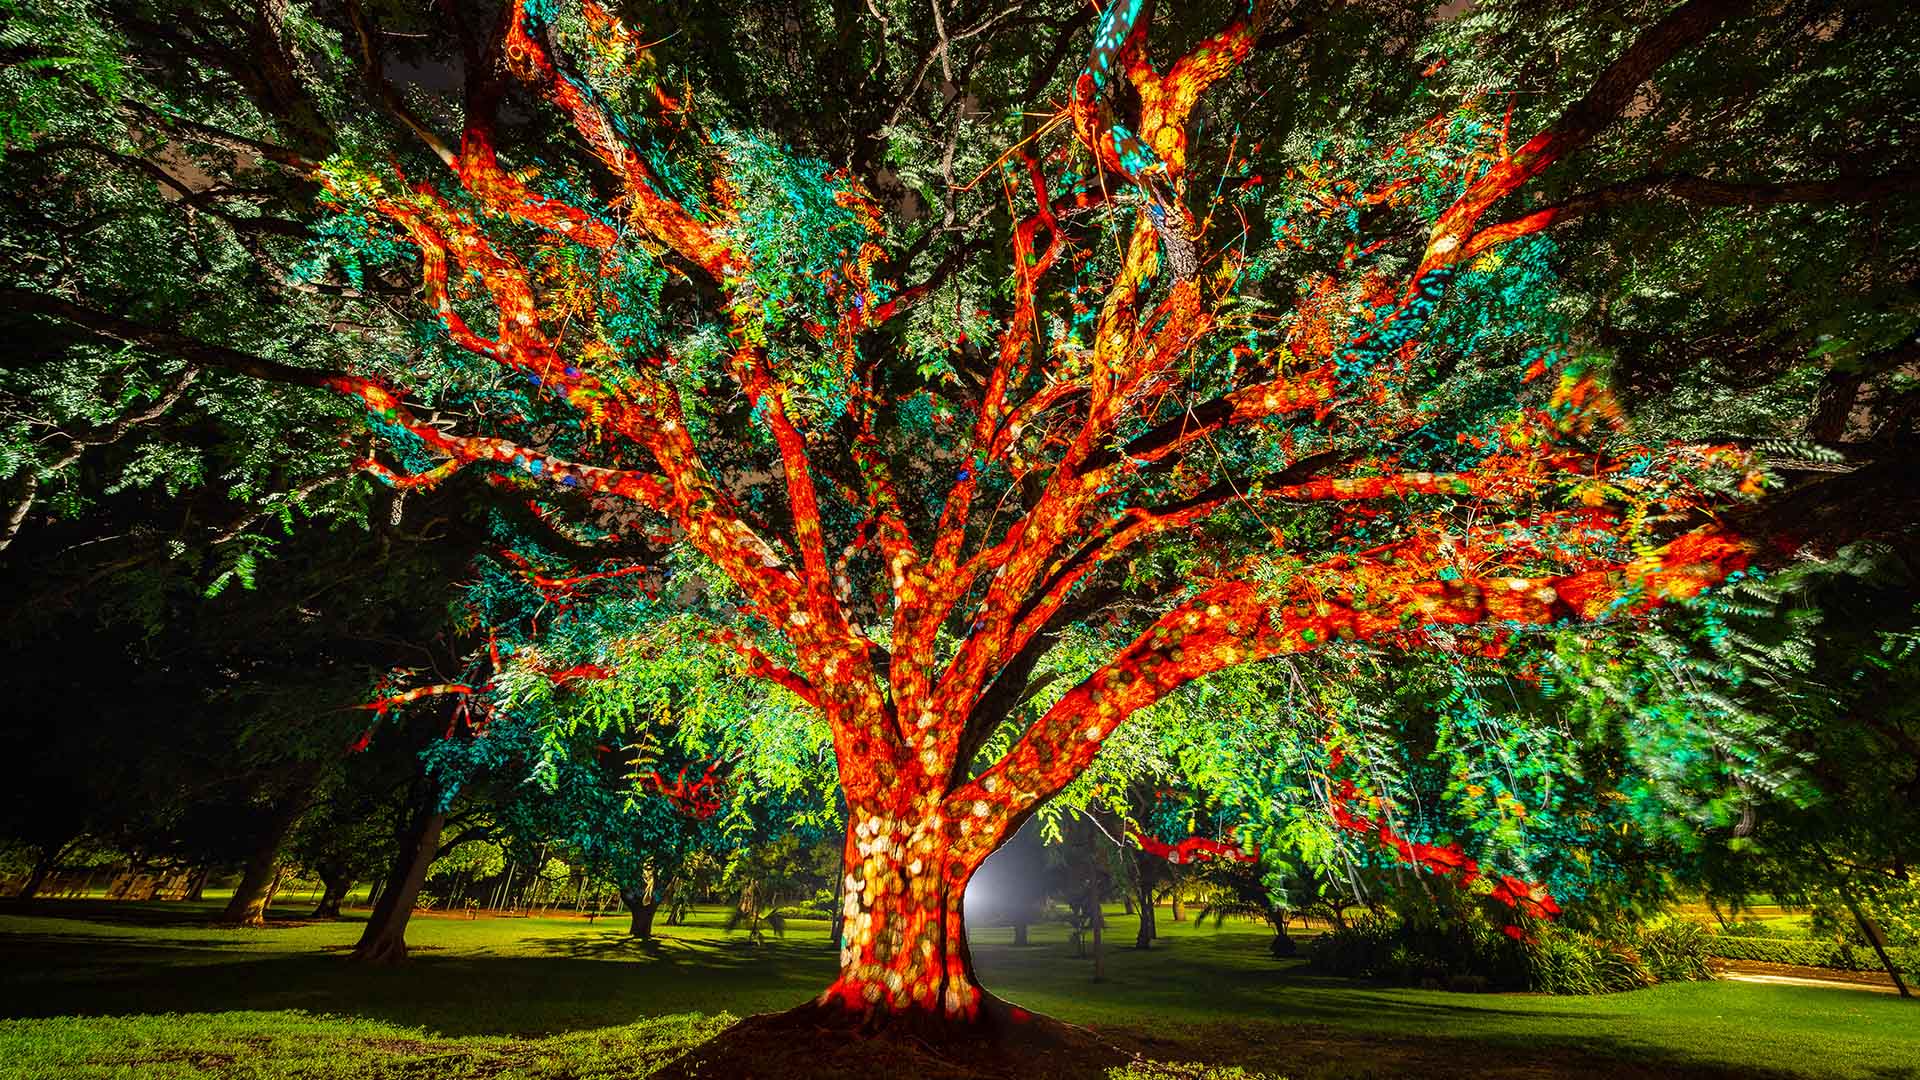 Brisbane's Glowing After-Dark Festival Botanica Will Light Up the City Botanic Gardens Again in May